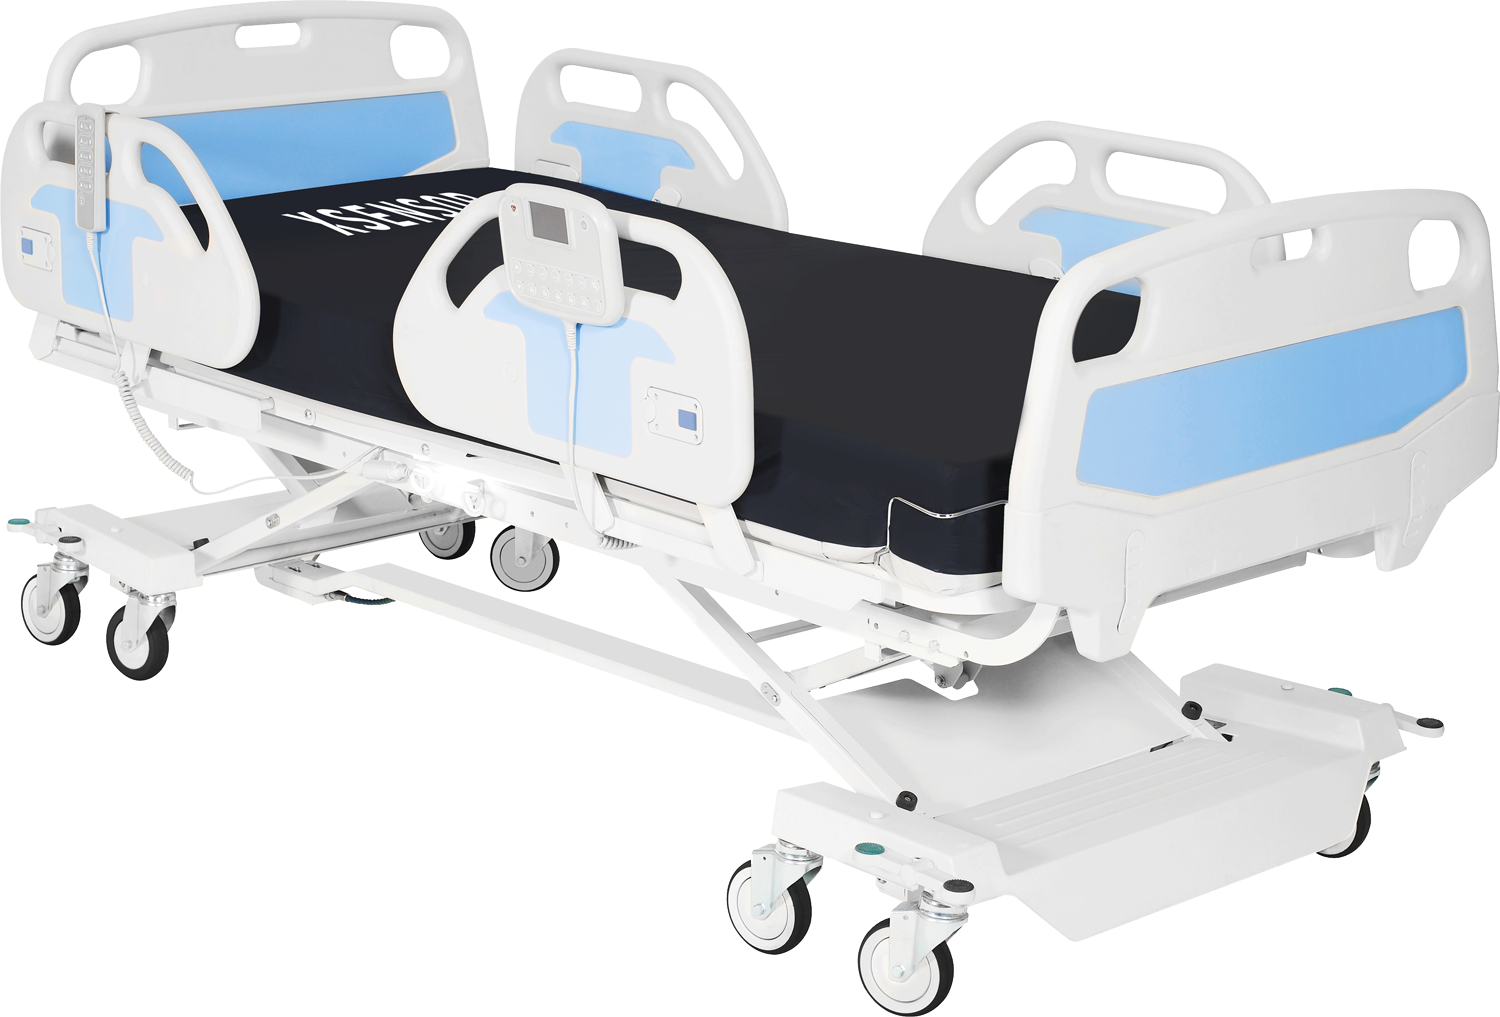 XSENSOR's ForeSite Intelligent Surface Mattress on a hospital bed.